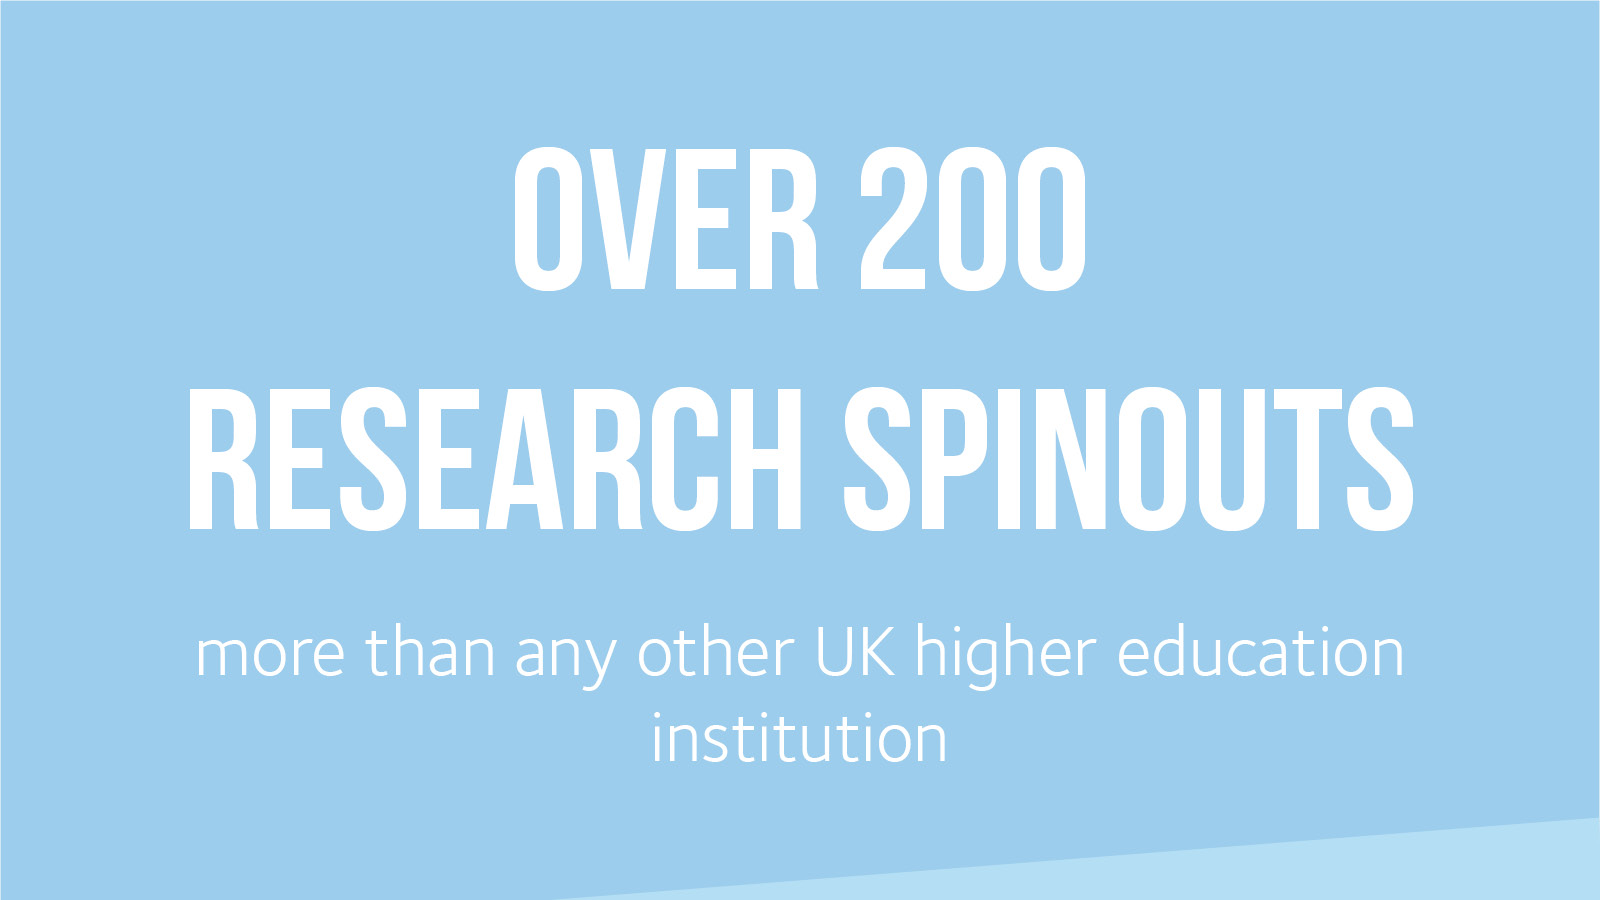 Over 200 research spinouts - more than any other UK HE institution